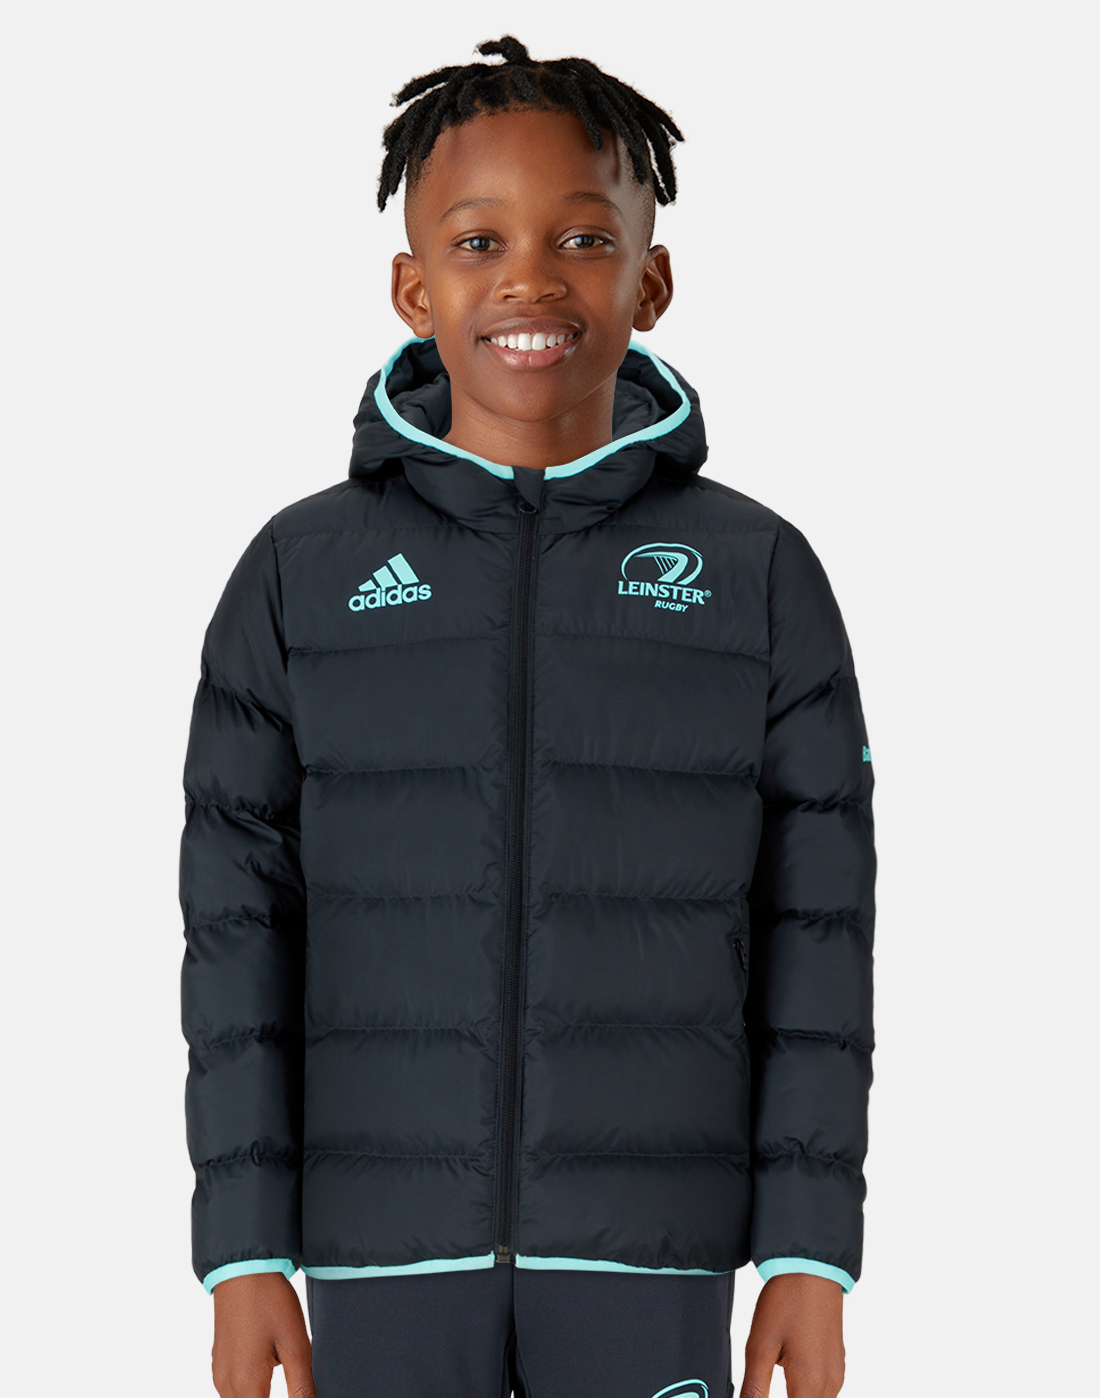 adidas Kids Leinster Winter Jacket - Grey | Life Style Sports IE